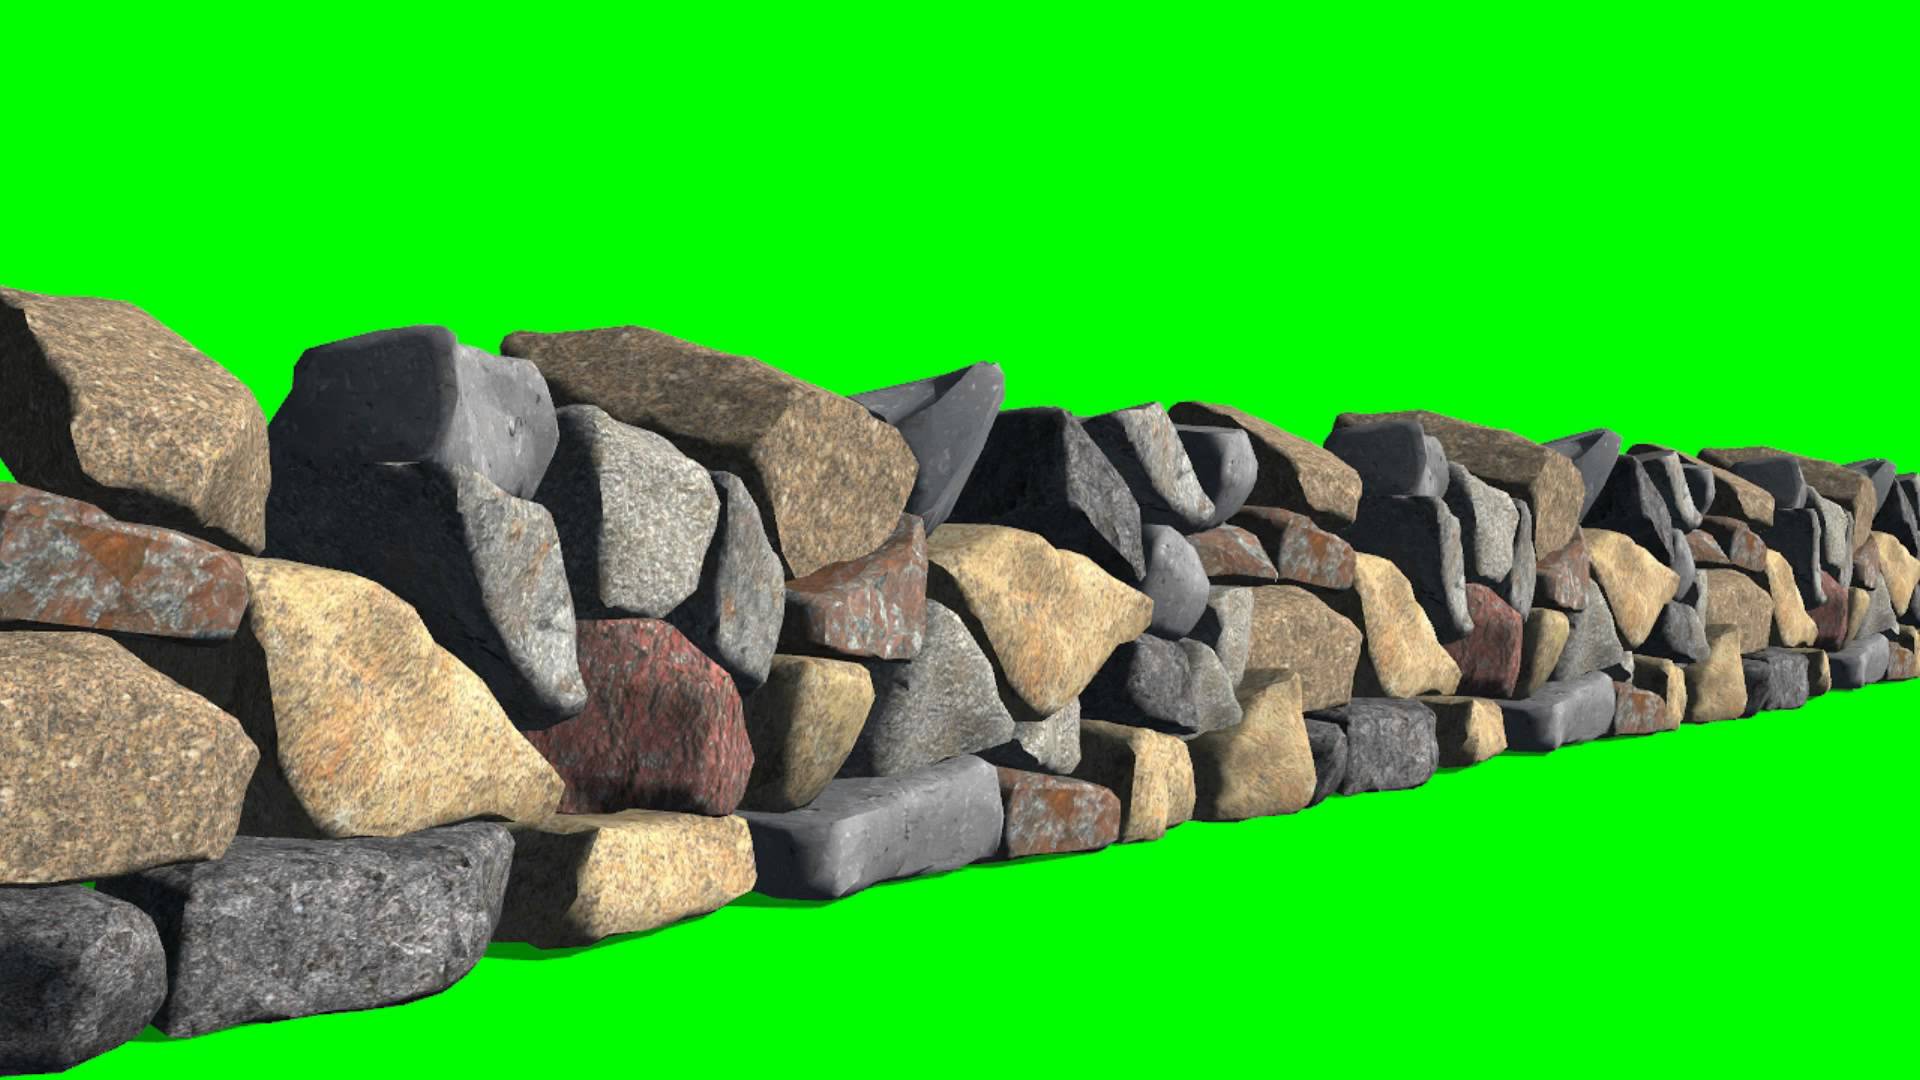 stone wall - different views - green screen effect - YouTube